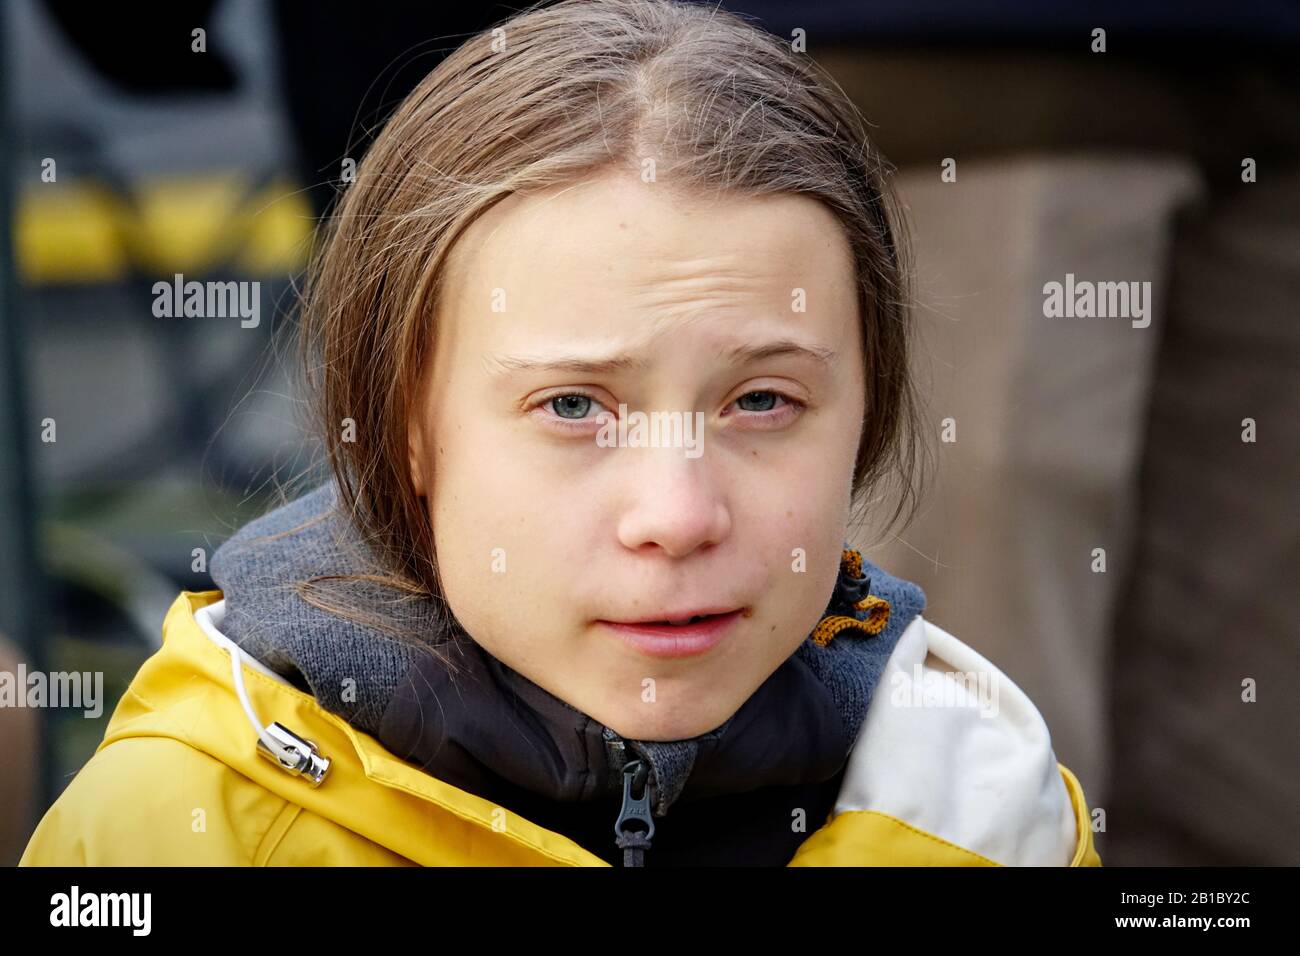 Greta Thunberg at the 'Fridays For Future' event in Turin. Turin, Italy - December 2019 Stock Photo